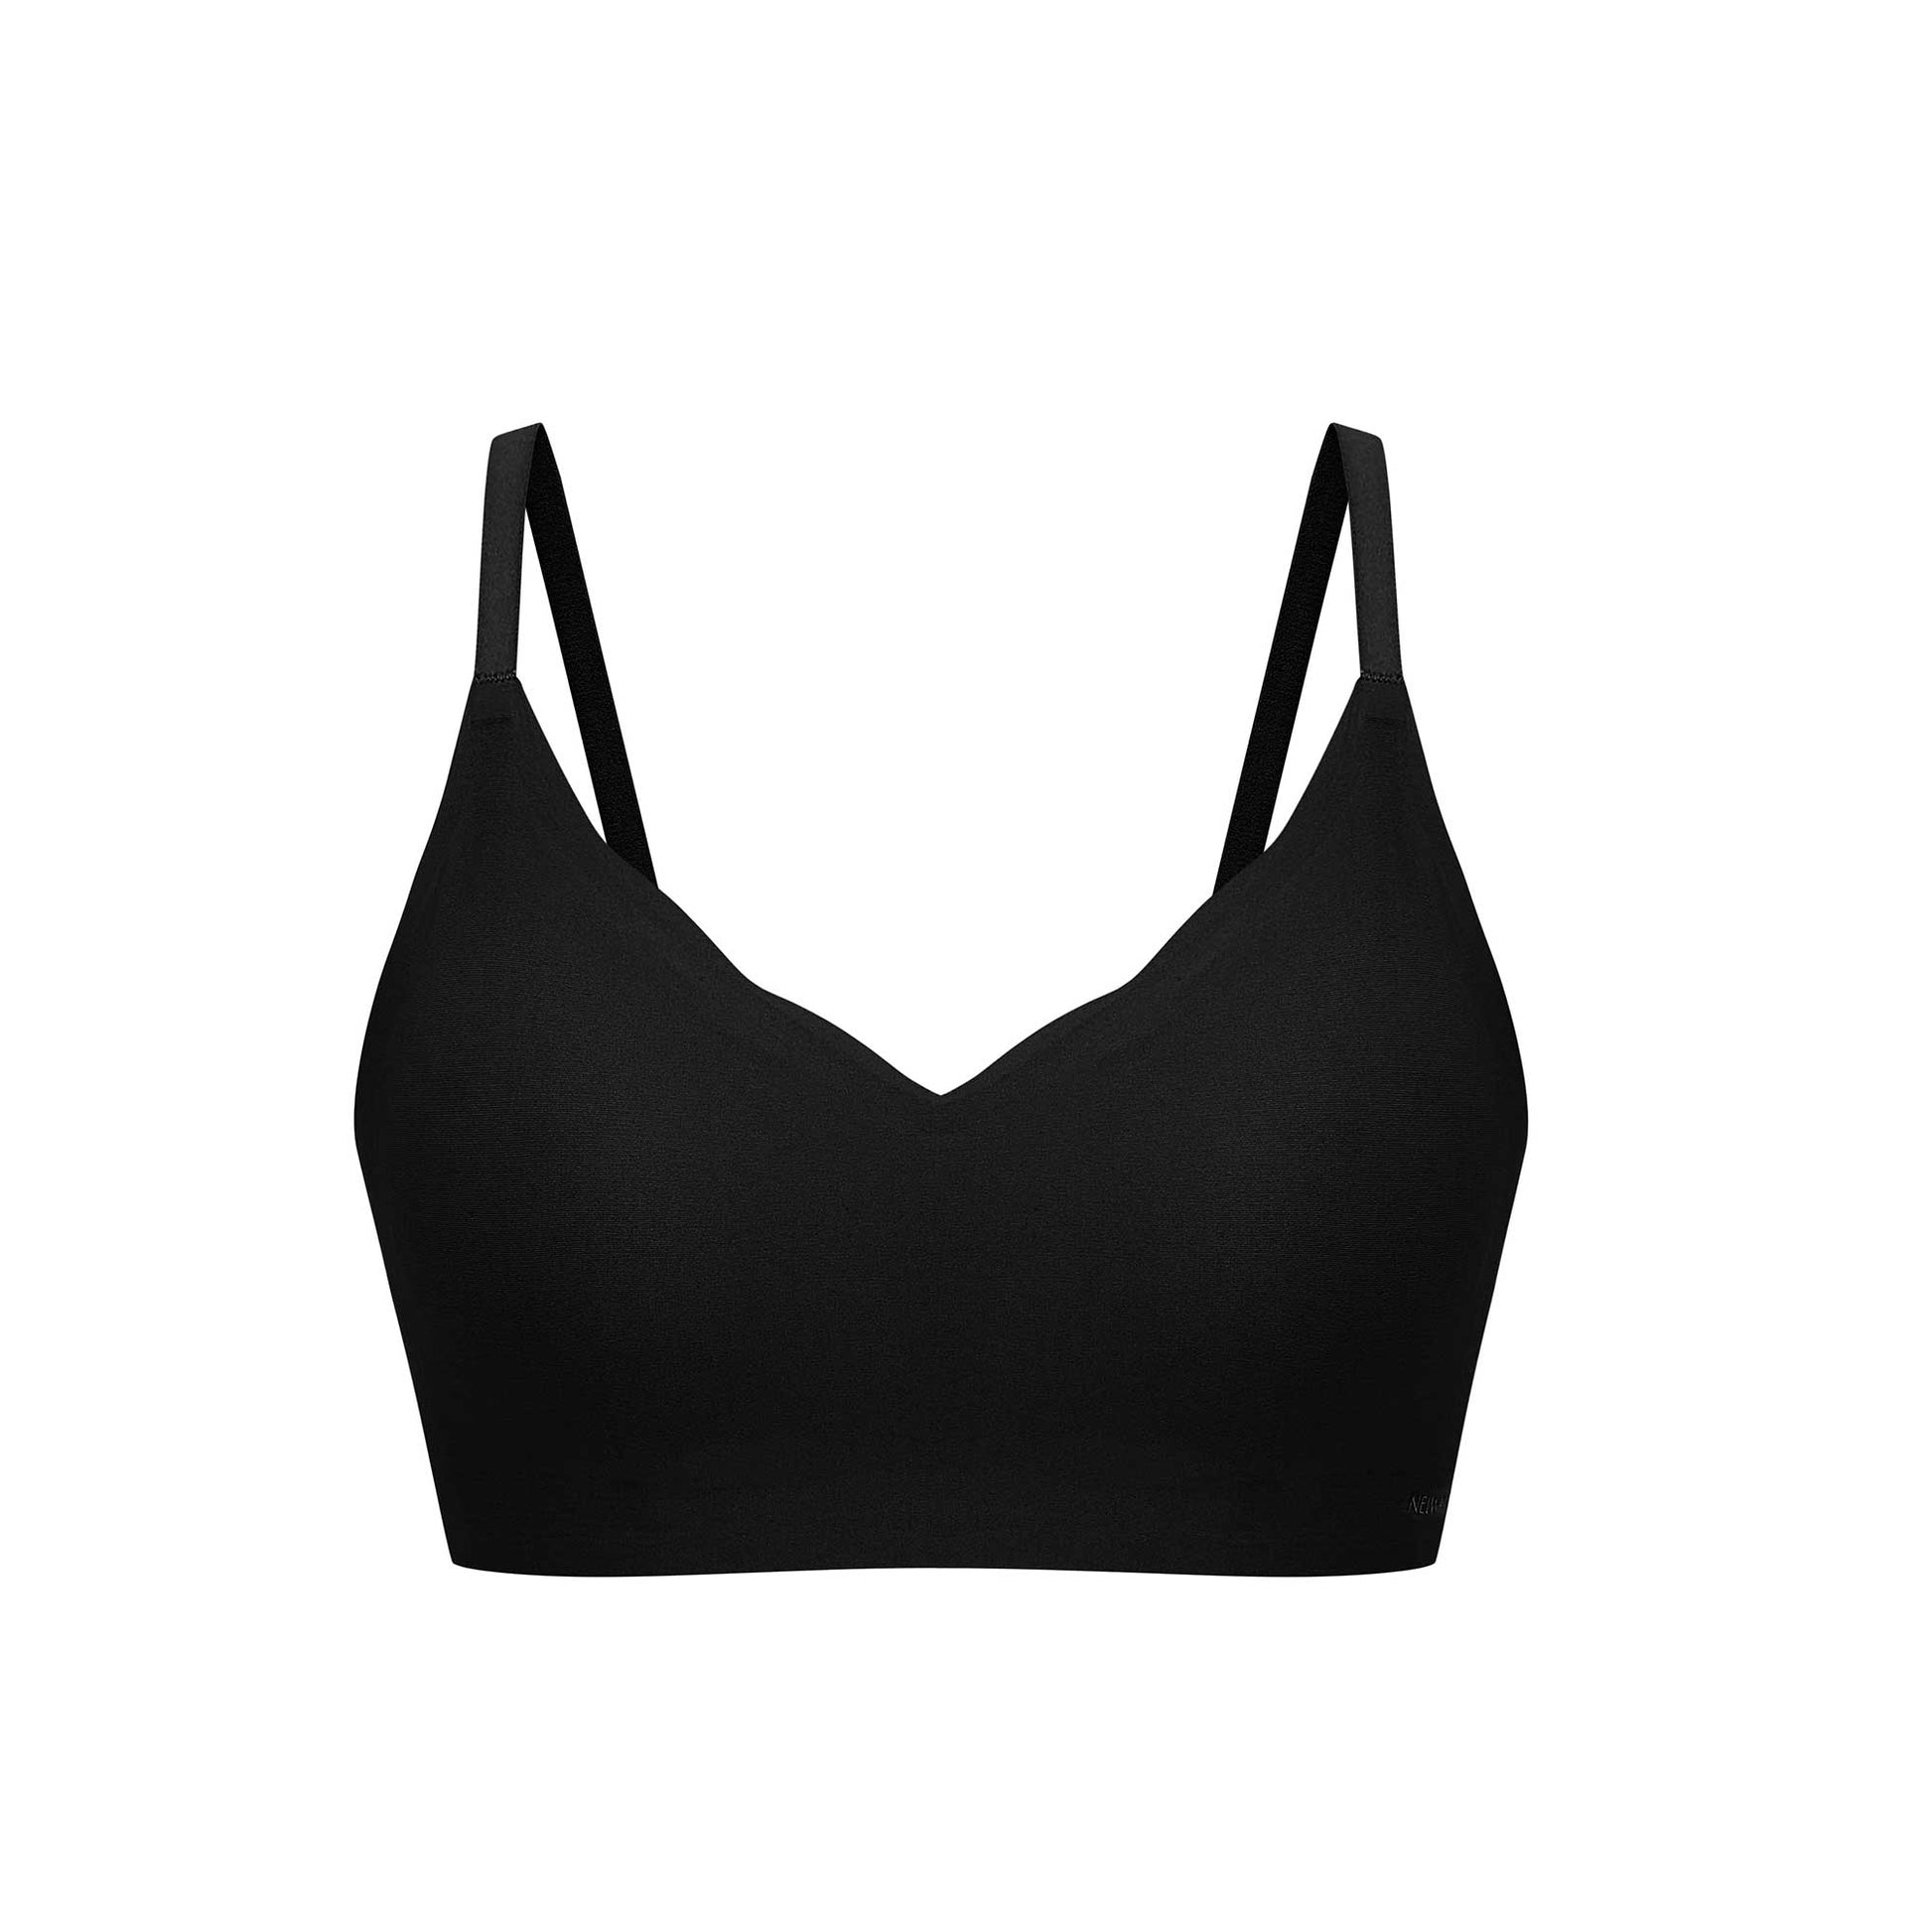 NEIWAI - Our #BarelyZero Fixed Cup Clasp Bra is the first